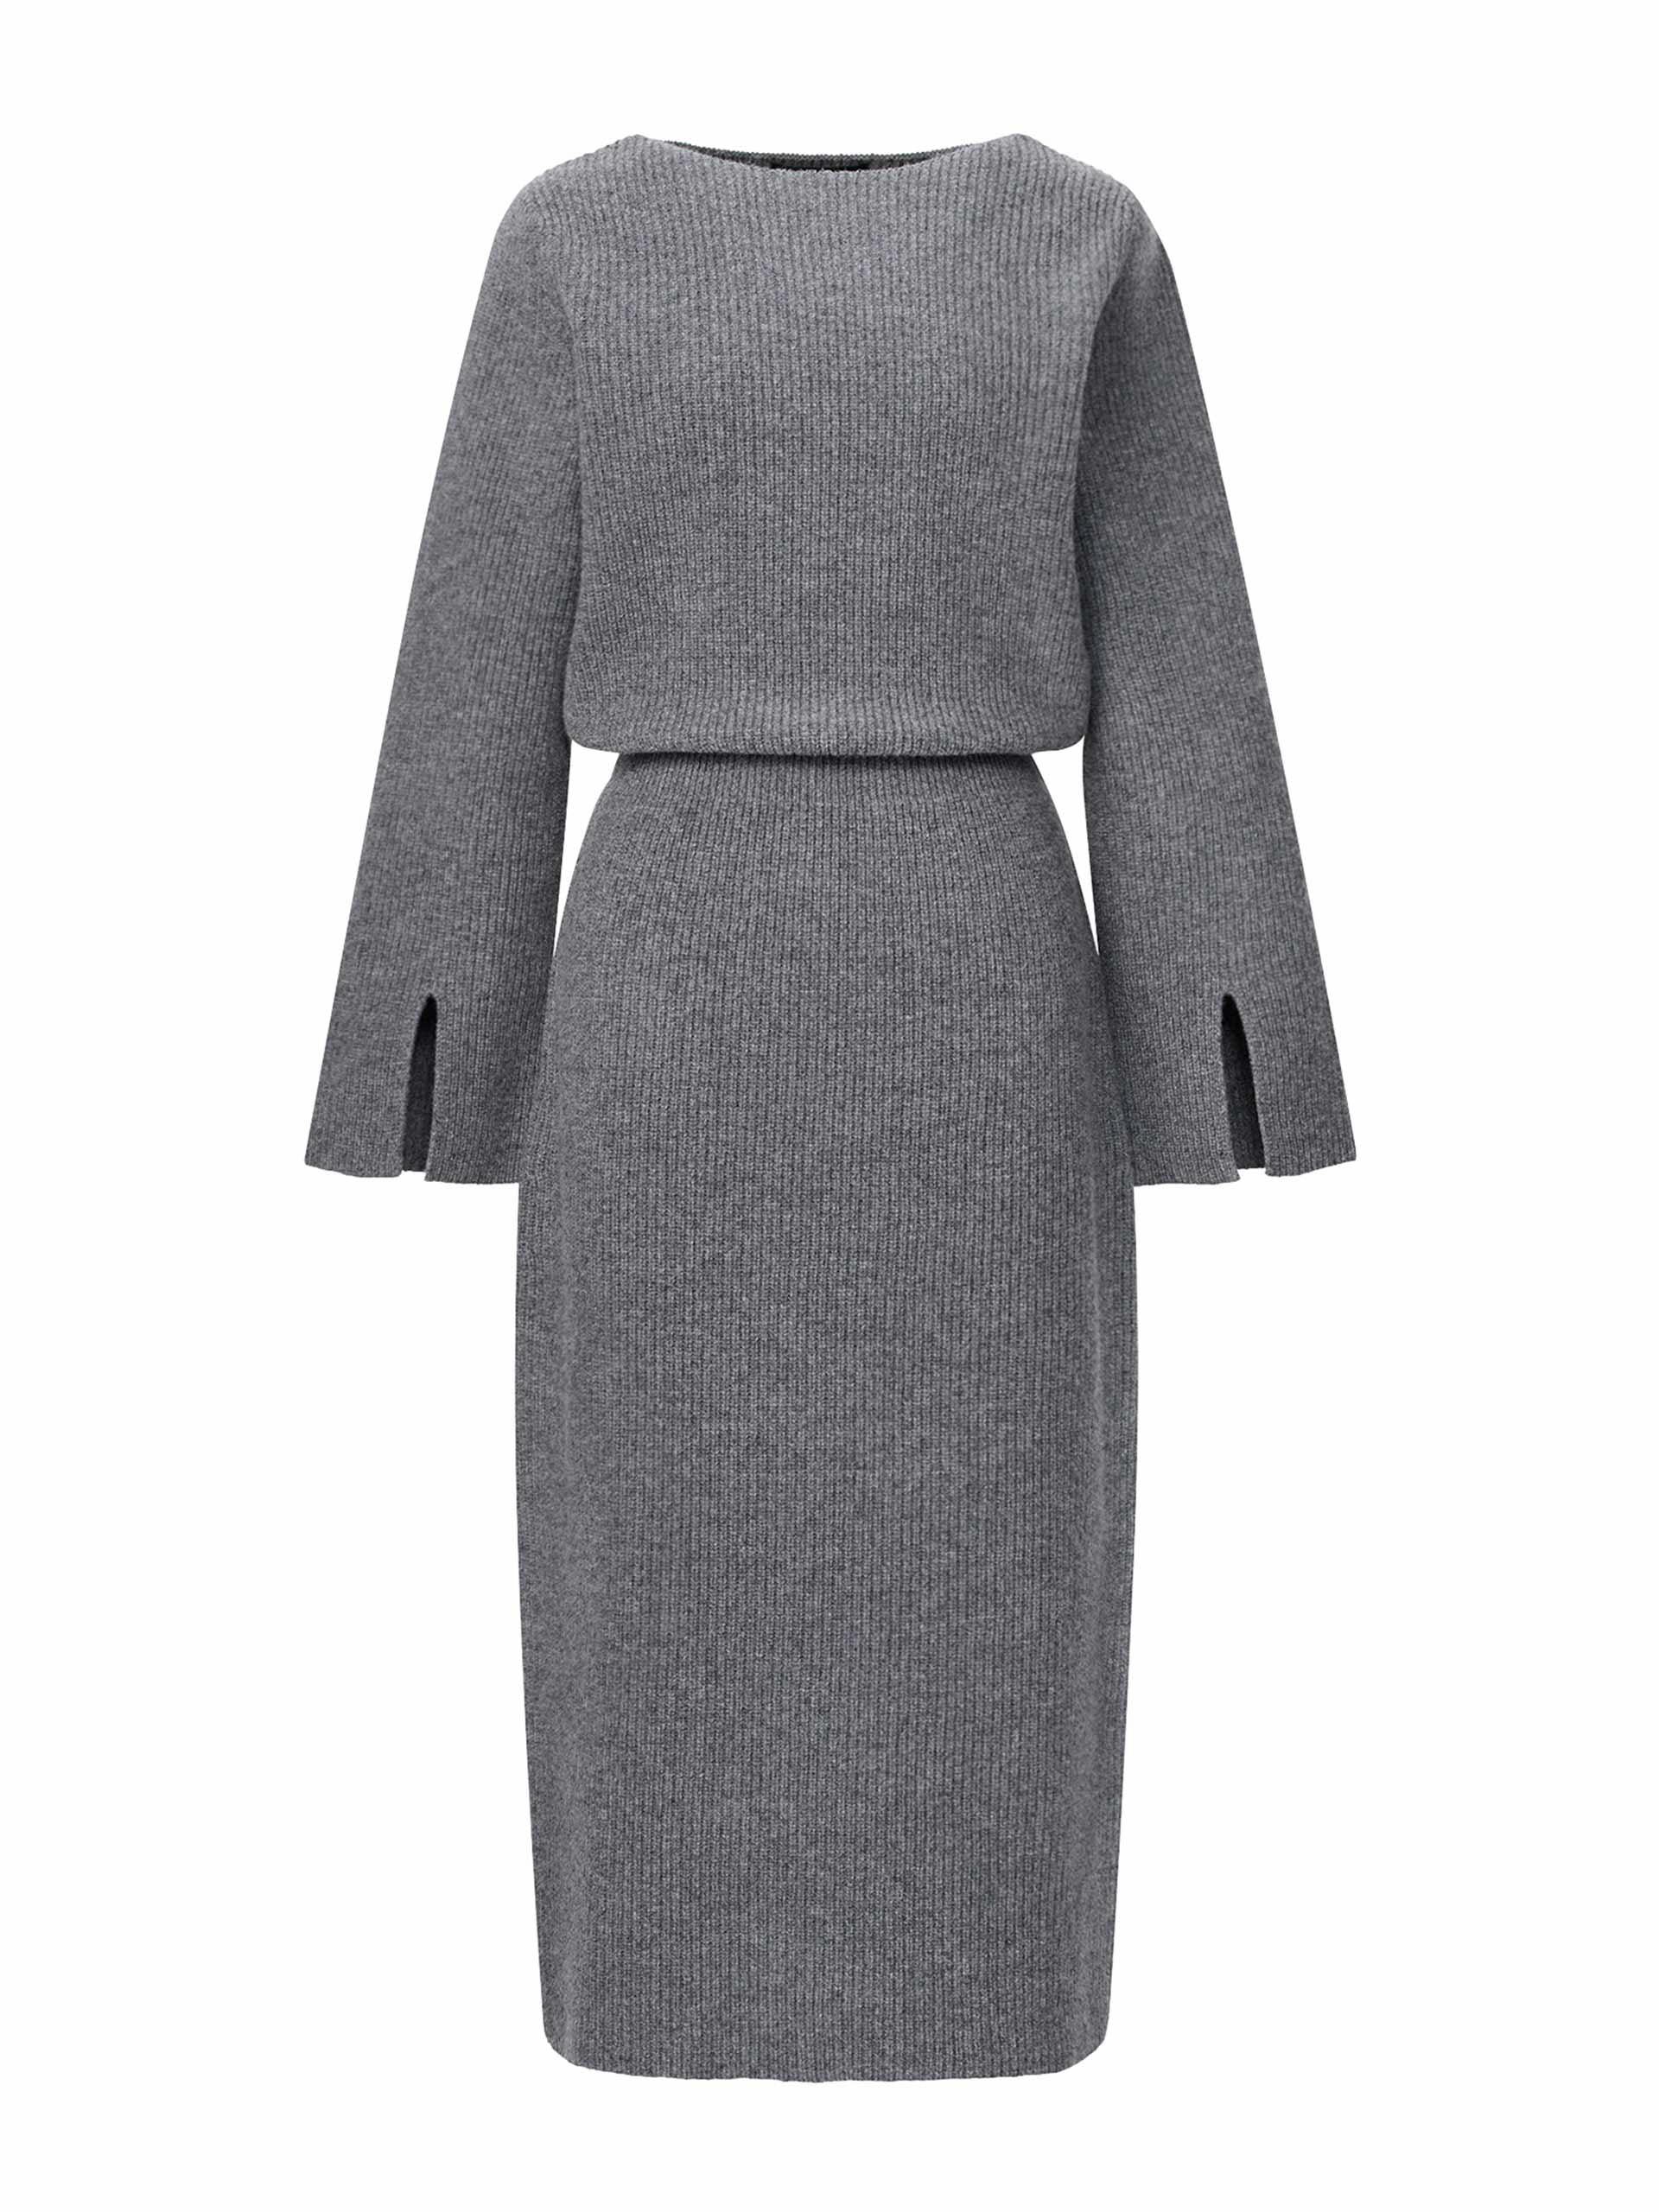 Grey long sleeved knitted dress